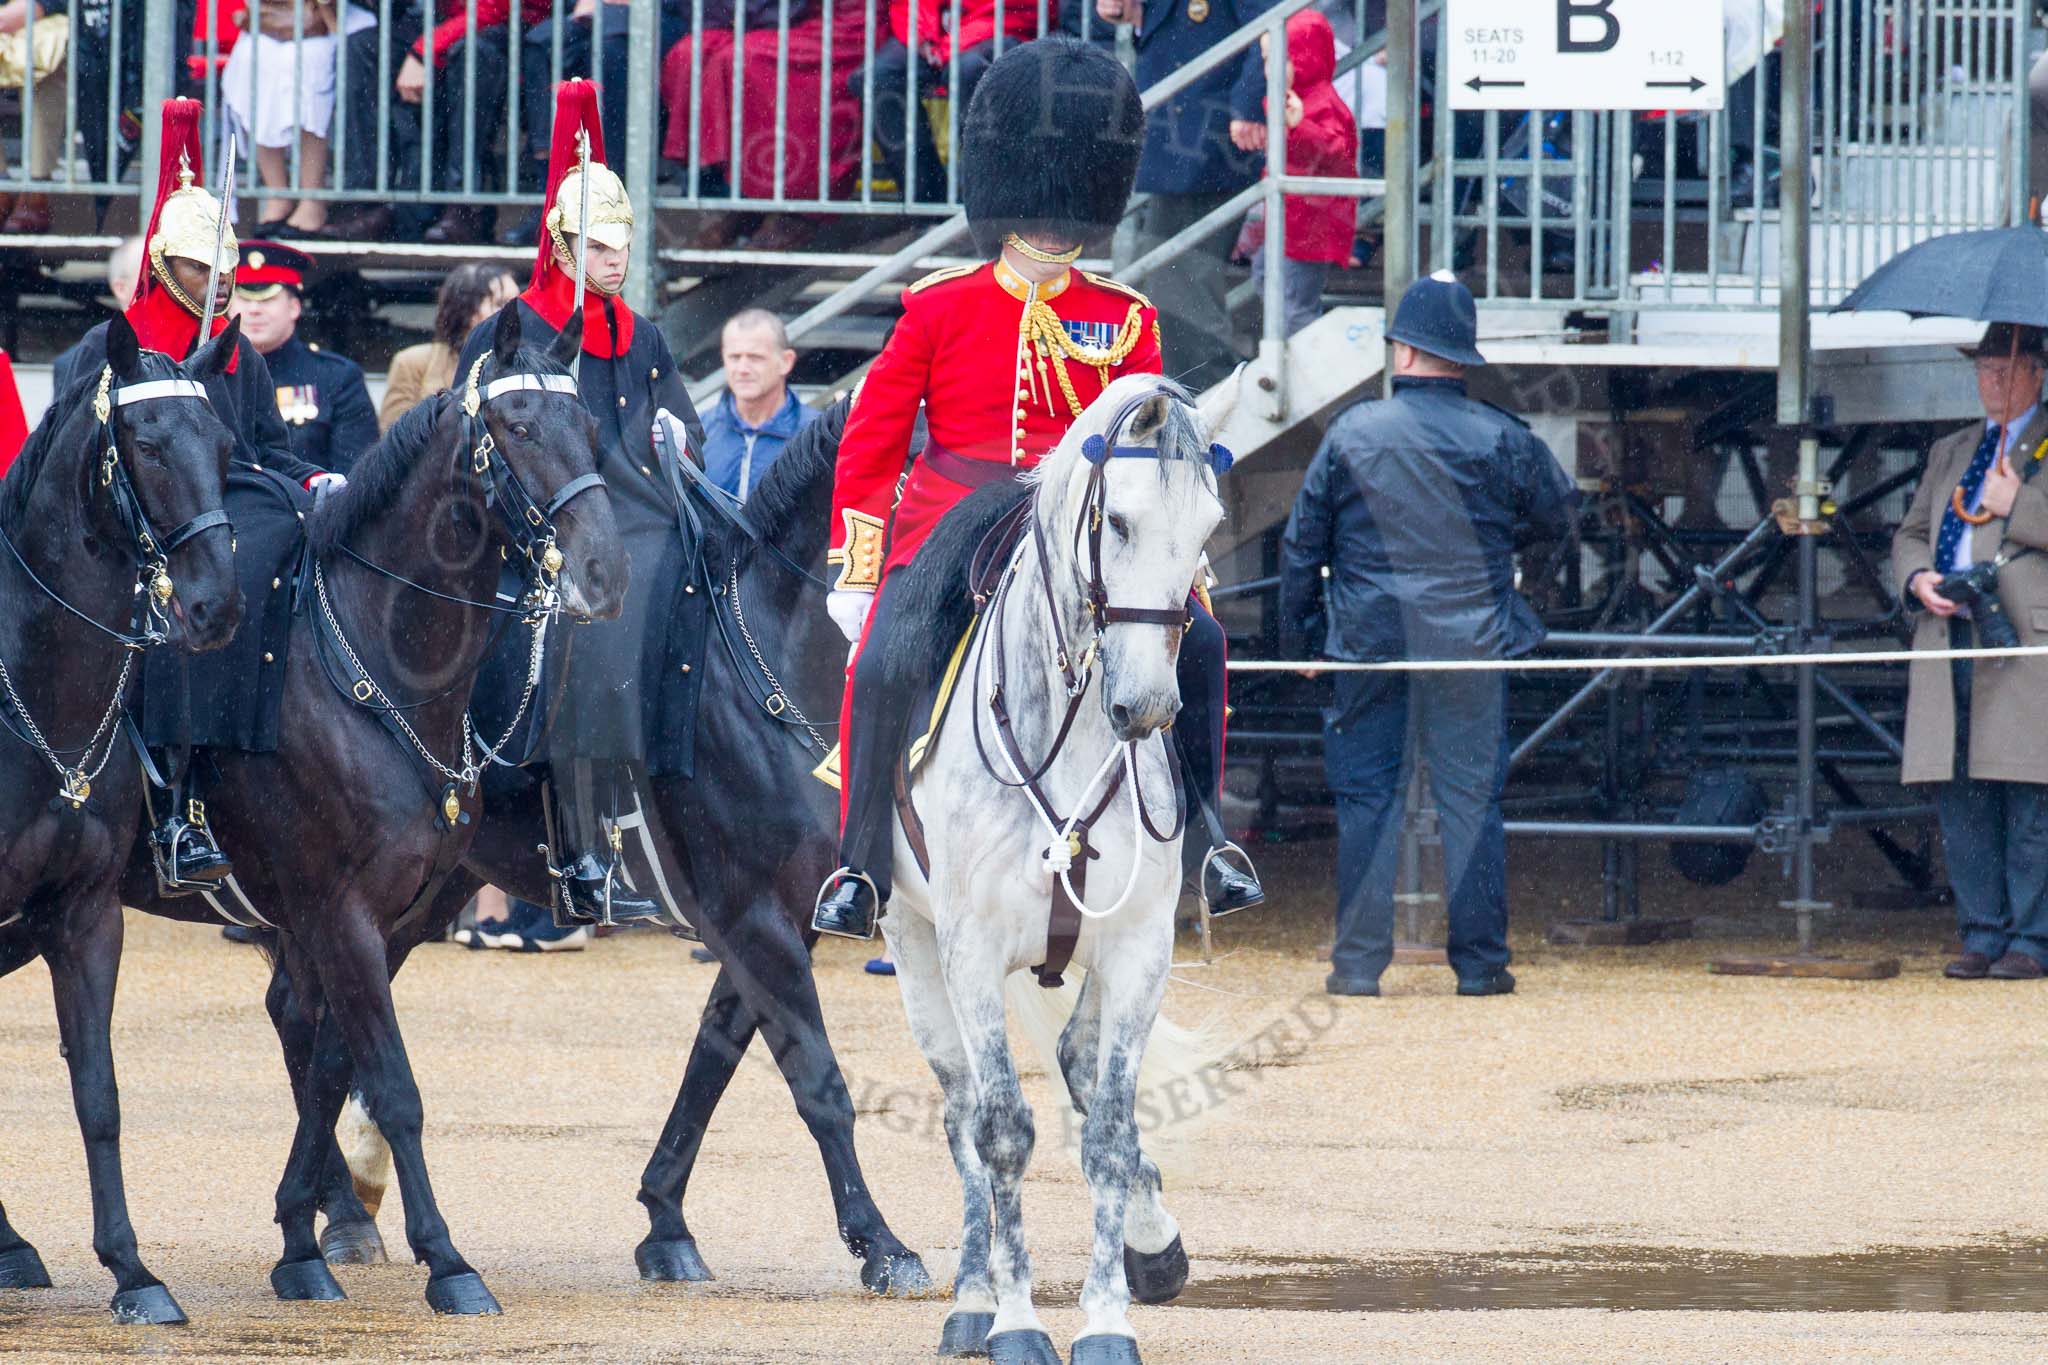 The Colonel's Review 2014.
Horse Guards Parade, Westminster,
London,

United Kingdom,
on 07 June 2014 at 10:56, image #233